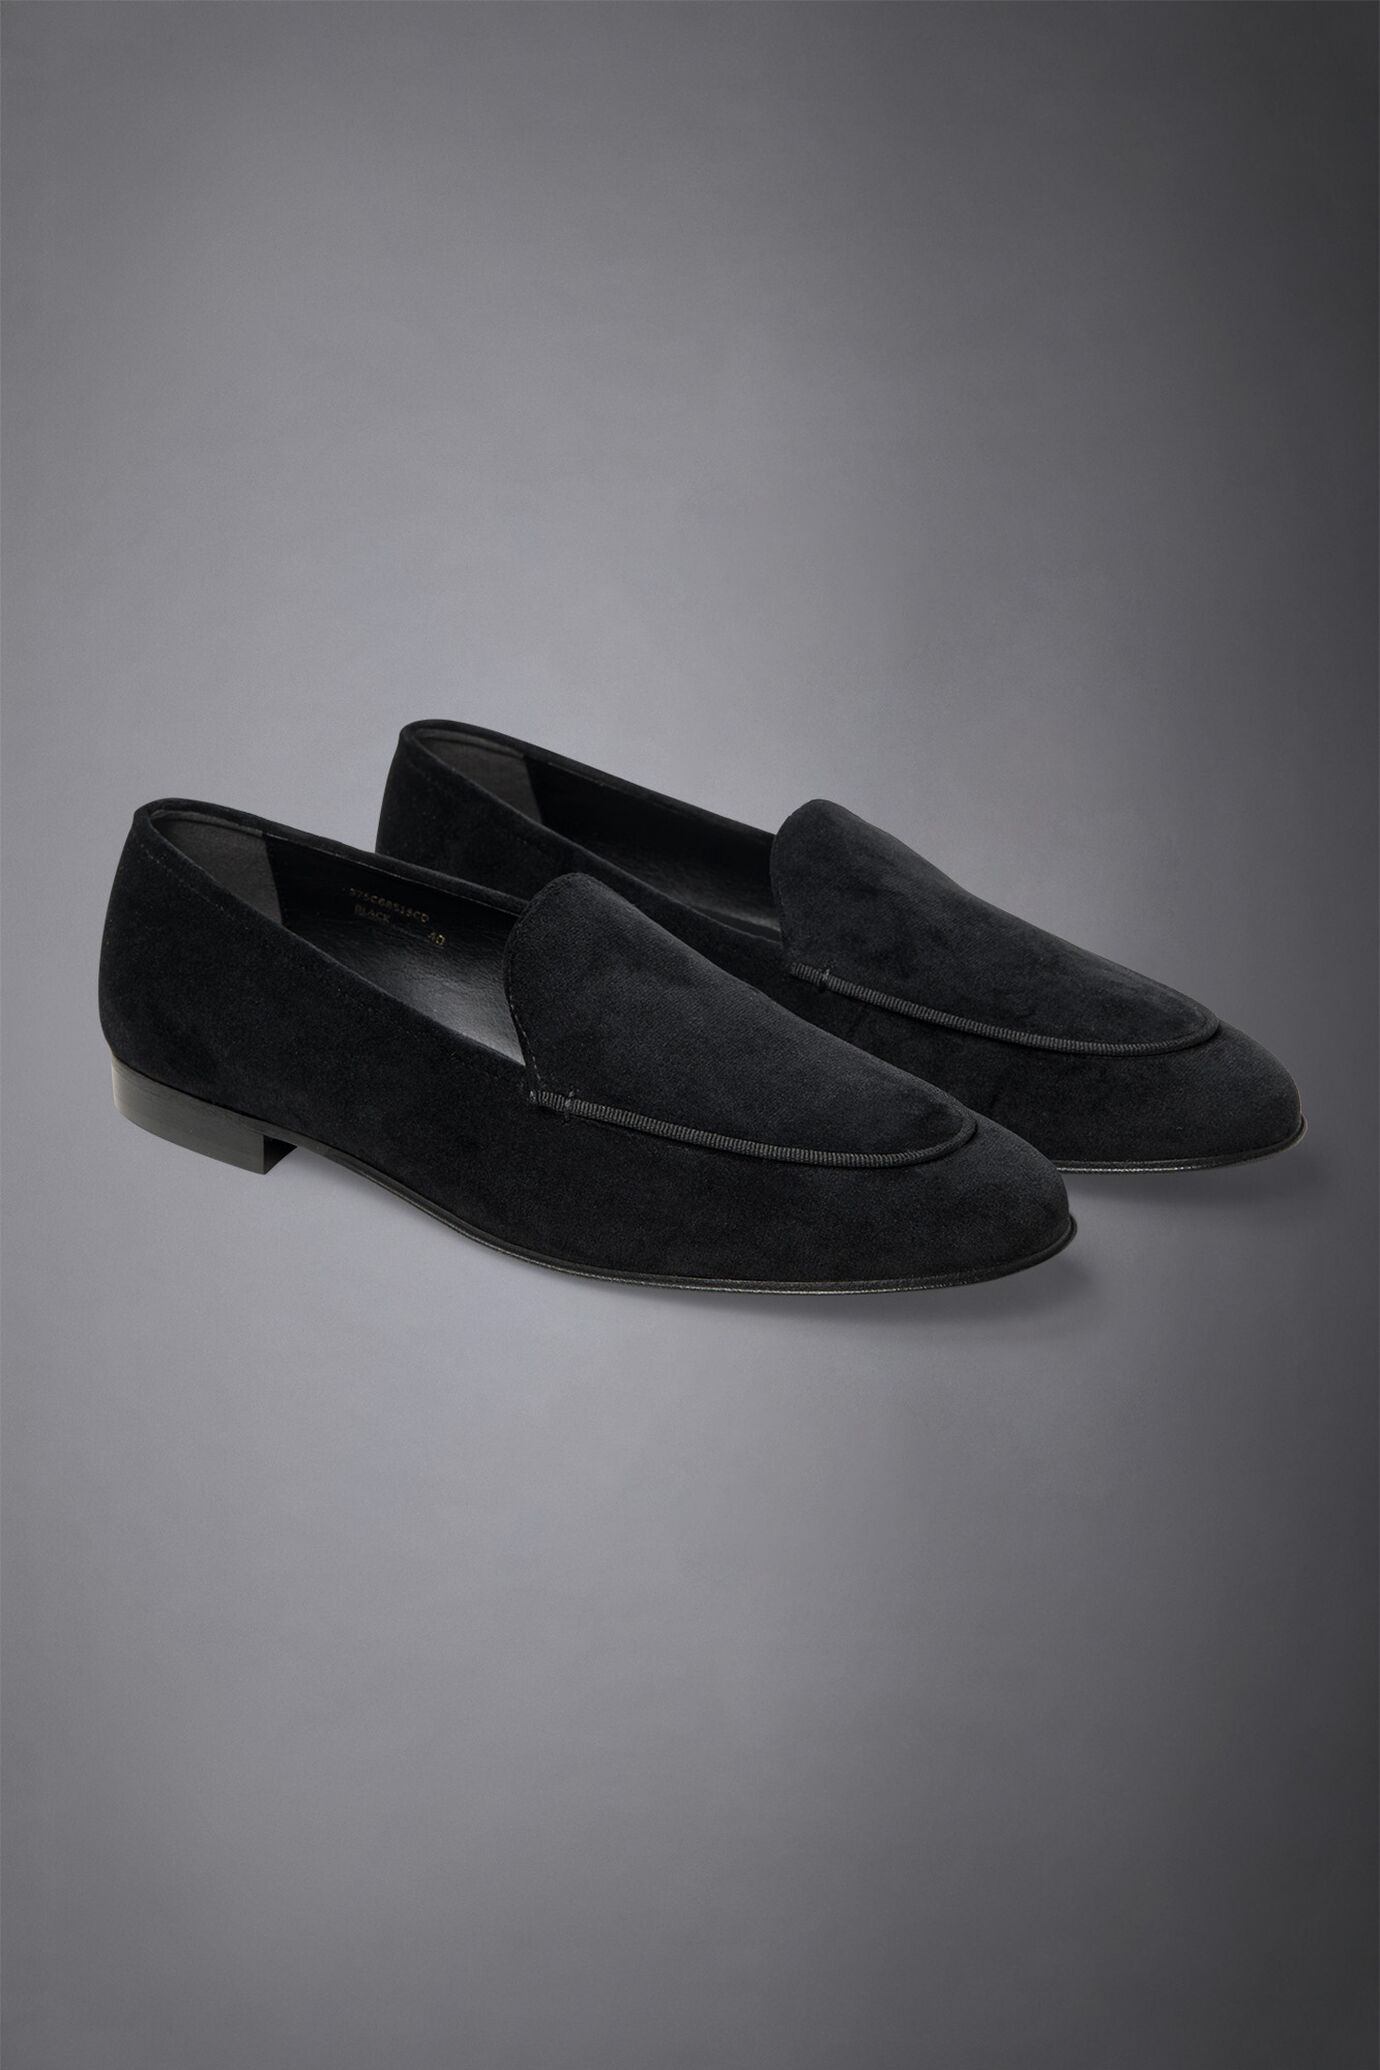 Classic velvet loafer with a thunit sole